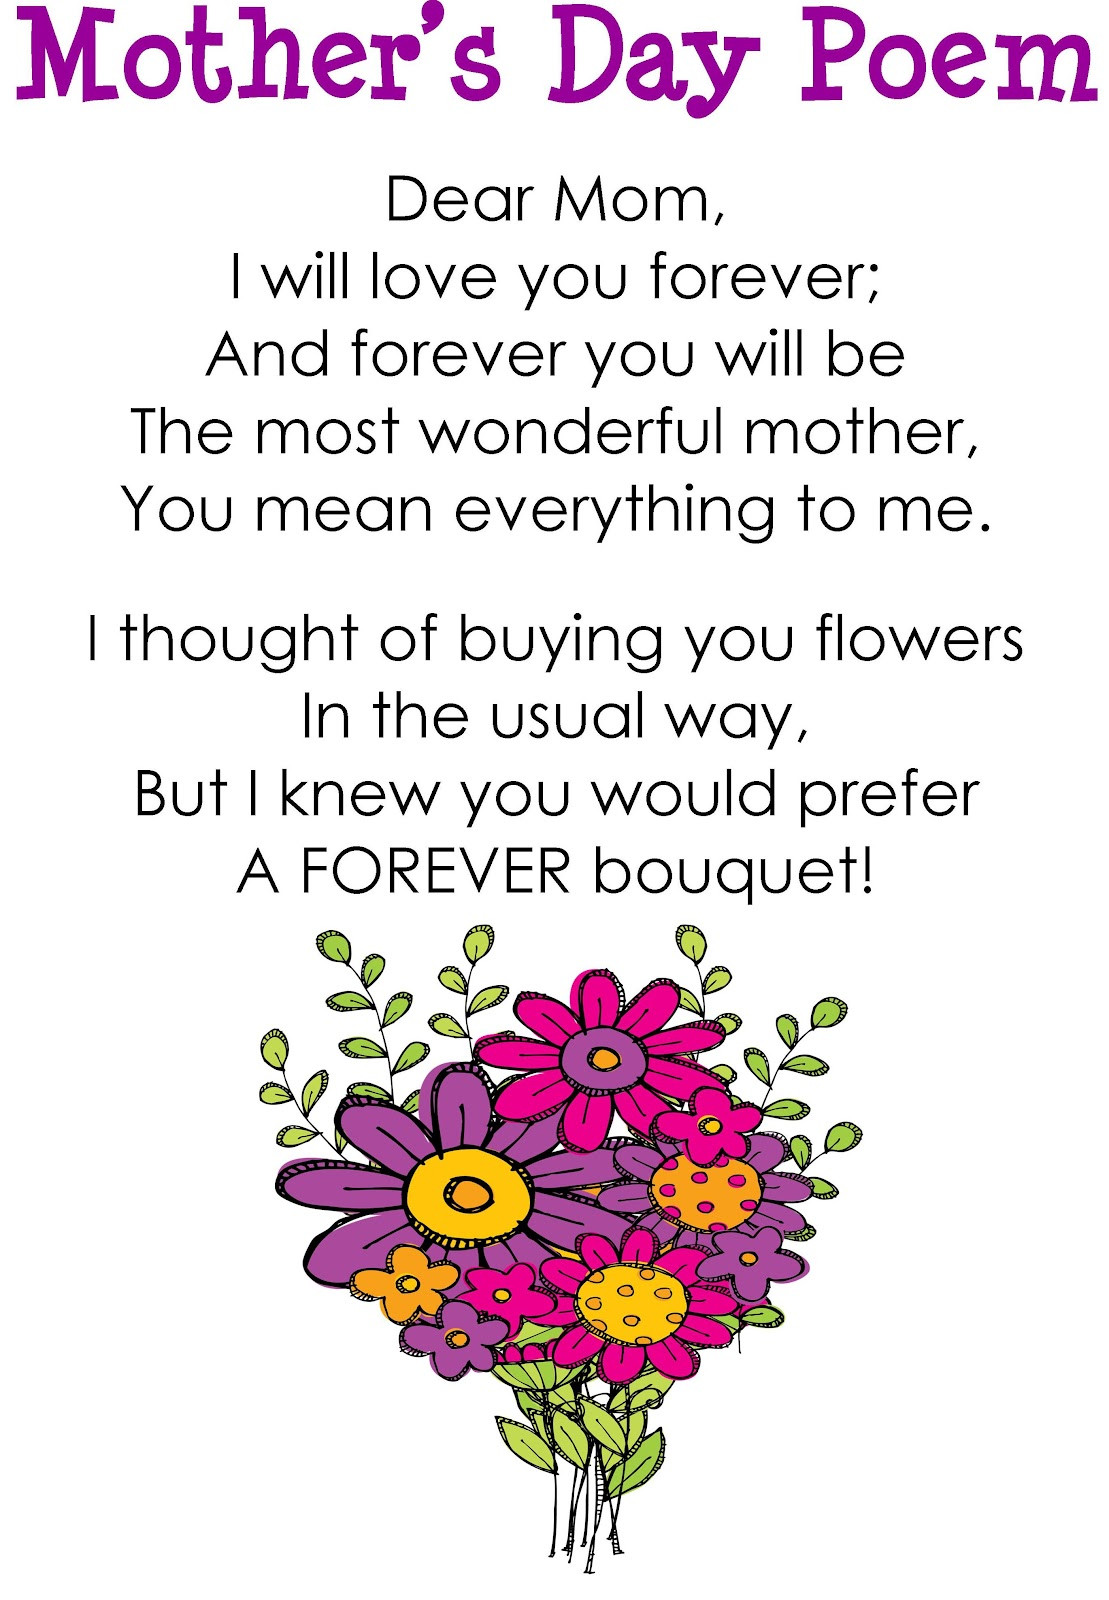 Quote On Mothers Day
 My Coolest Quotes Mother s Day Poem